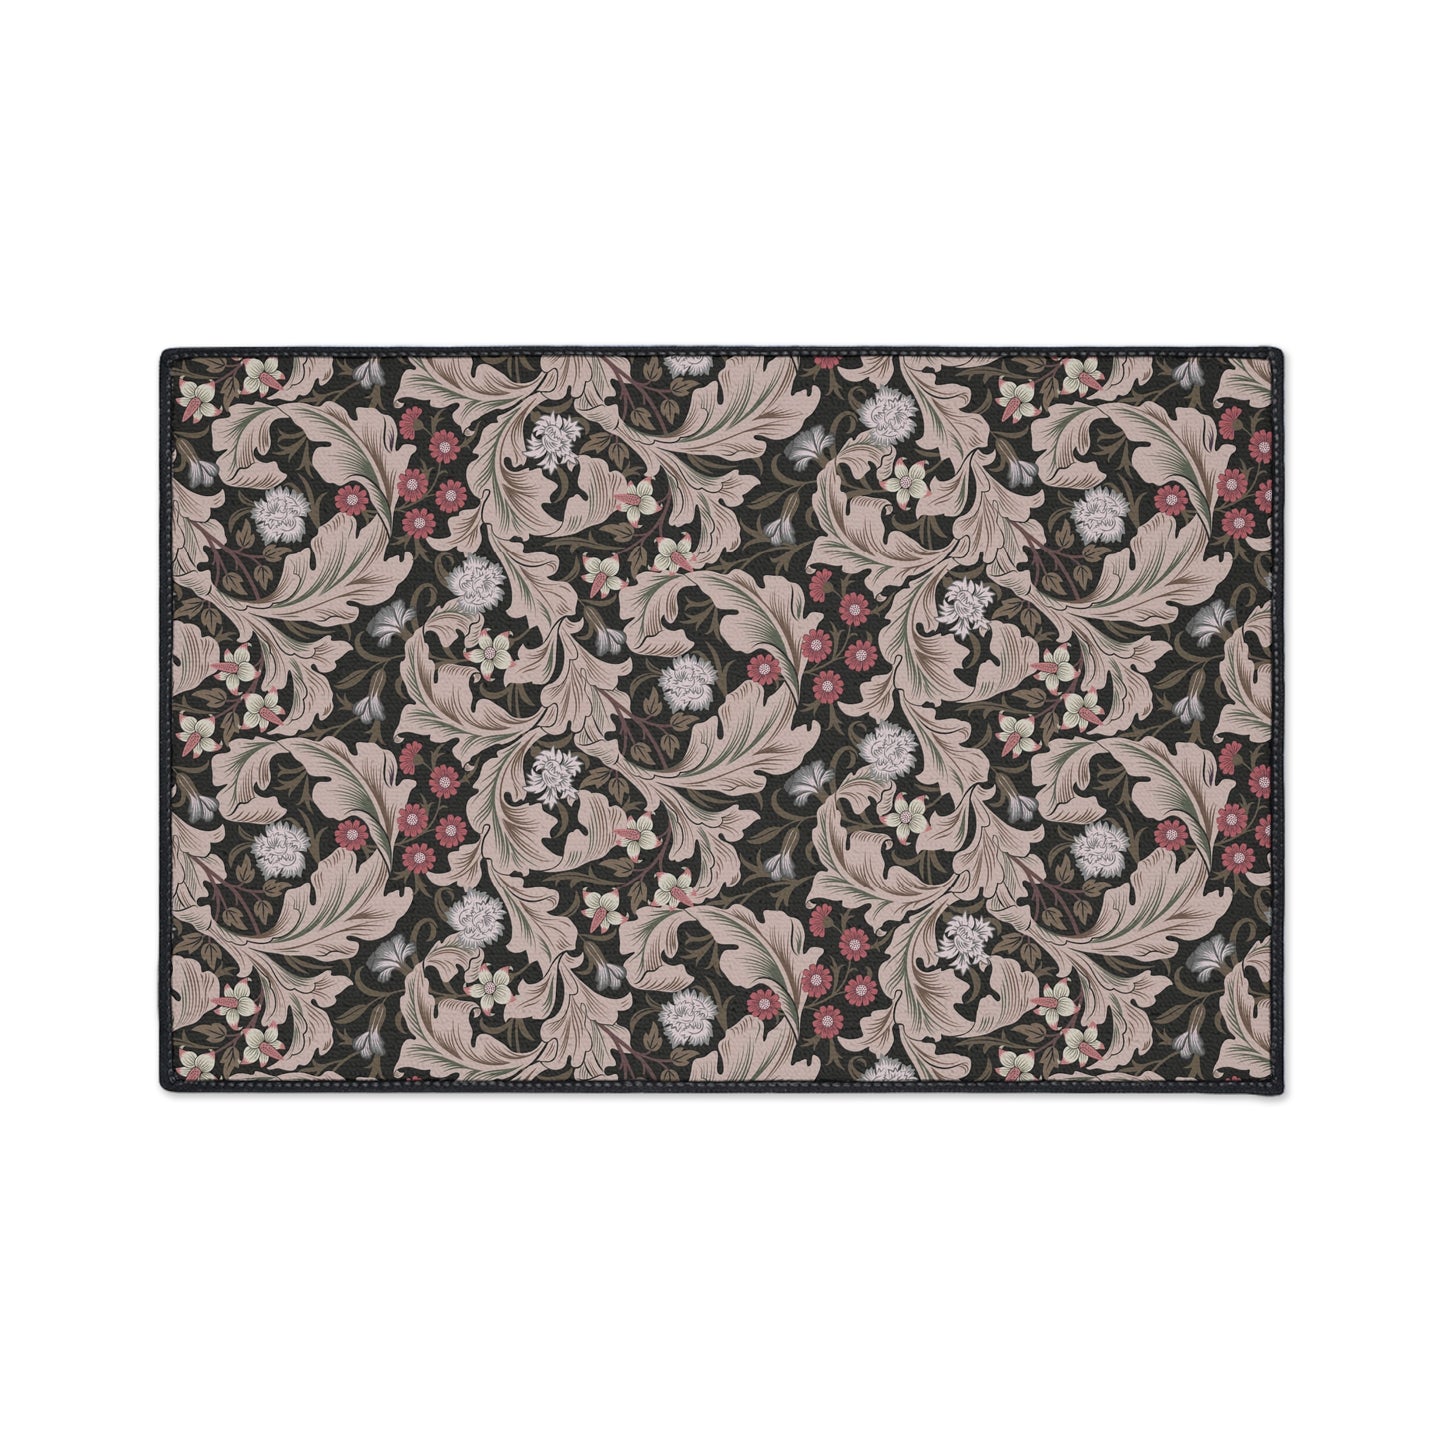 william-morris-co-heavy-duty-floor-mat-leicester-collection-mocha-6